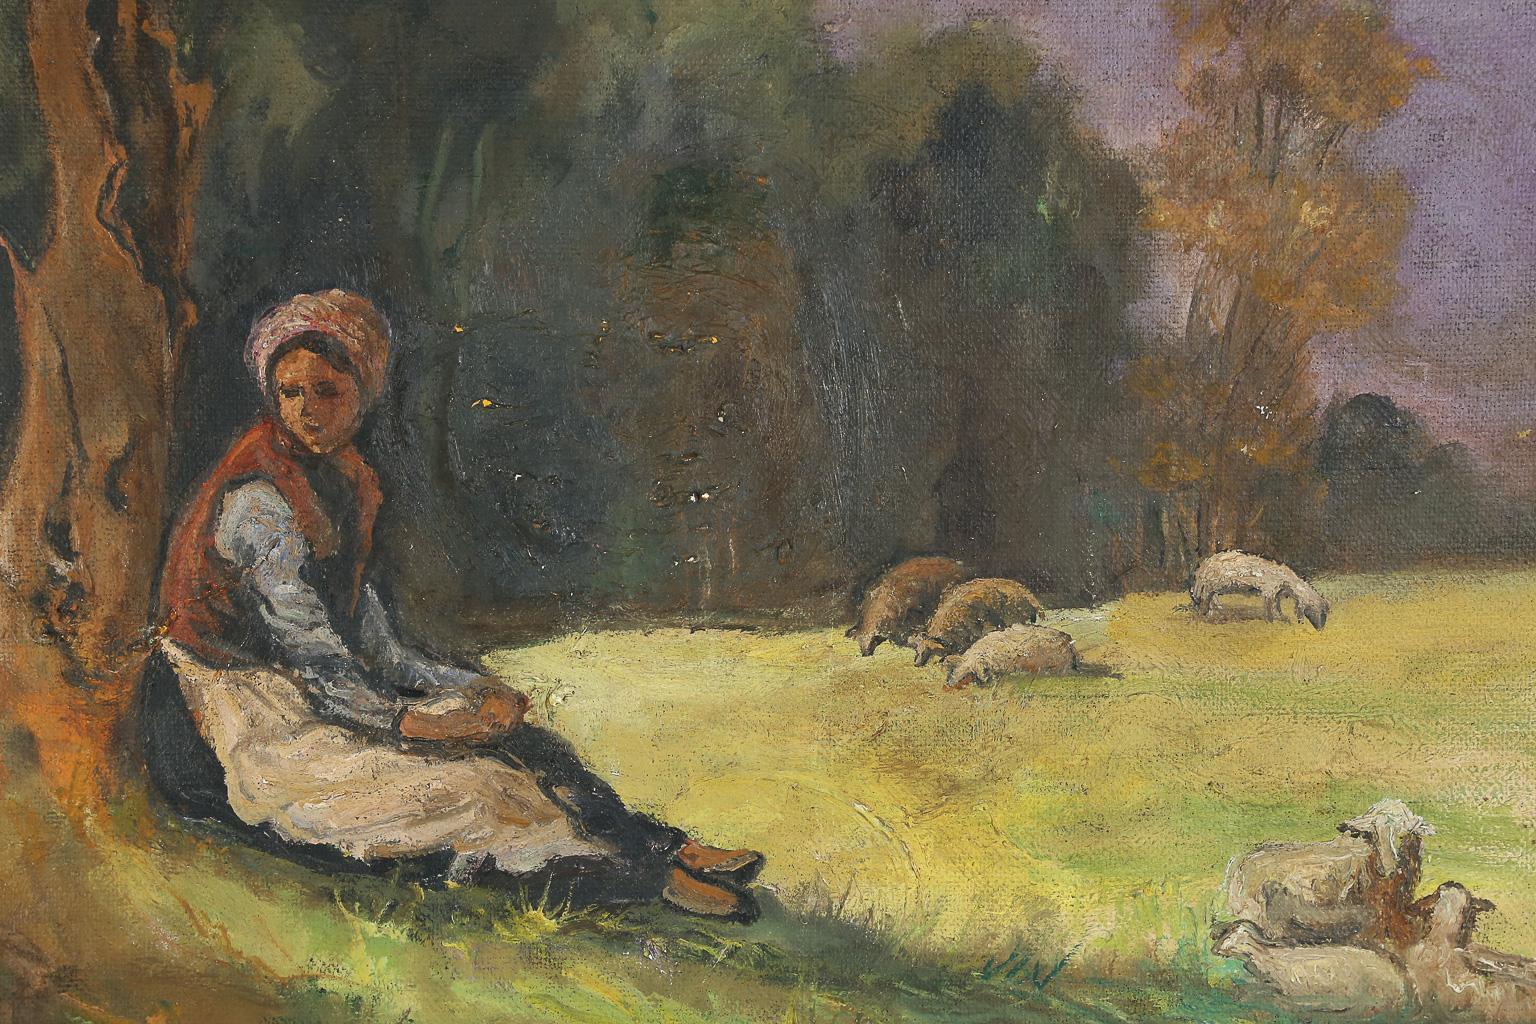 Found in France this is a beautiful painting of a woman tending sheep in the French countryside. The piece is signed and dated 1953.